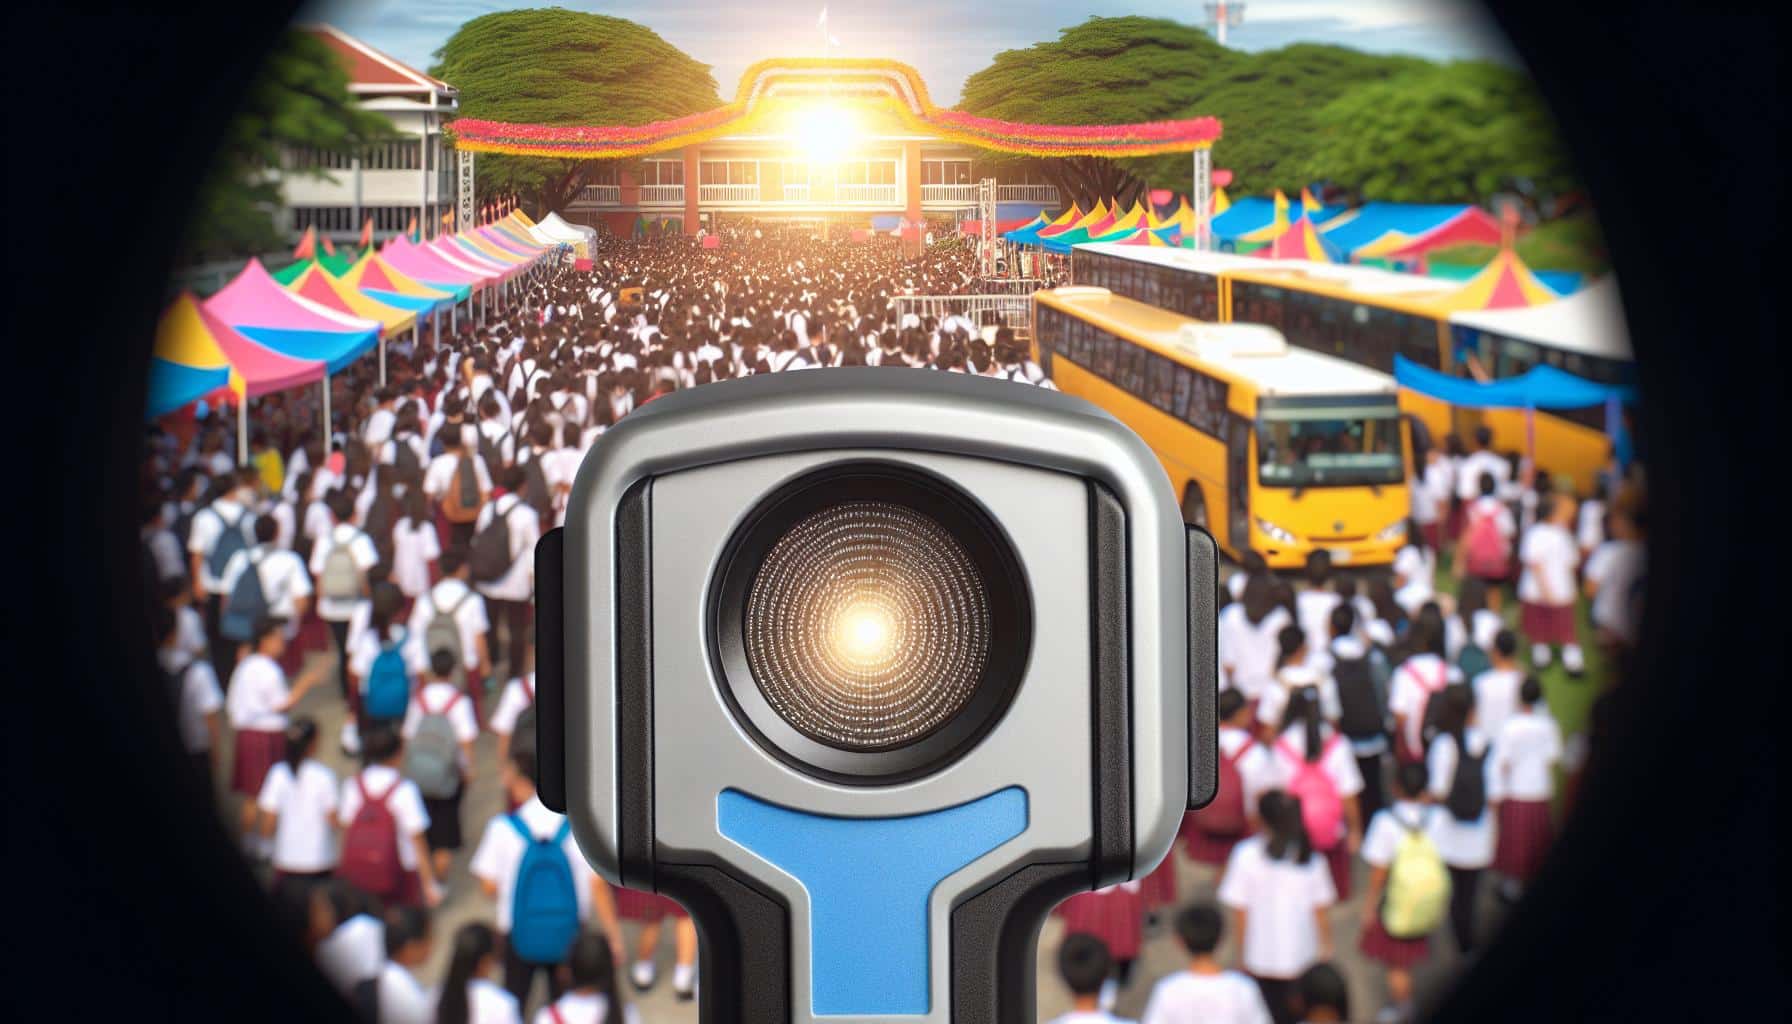 Metrasens' Advanced Detection Technology Ensures Enhanced Safety at Moore Public School Events | FinOracle